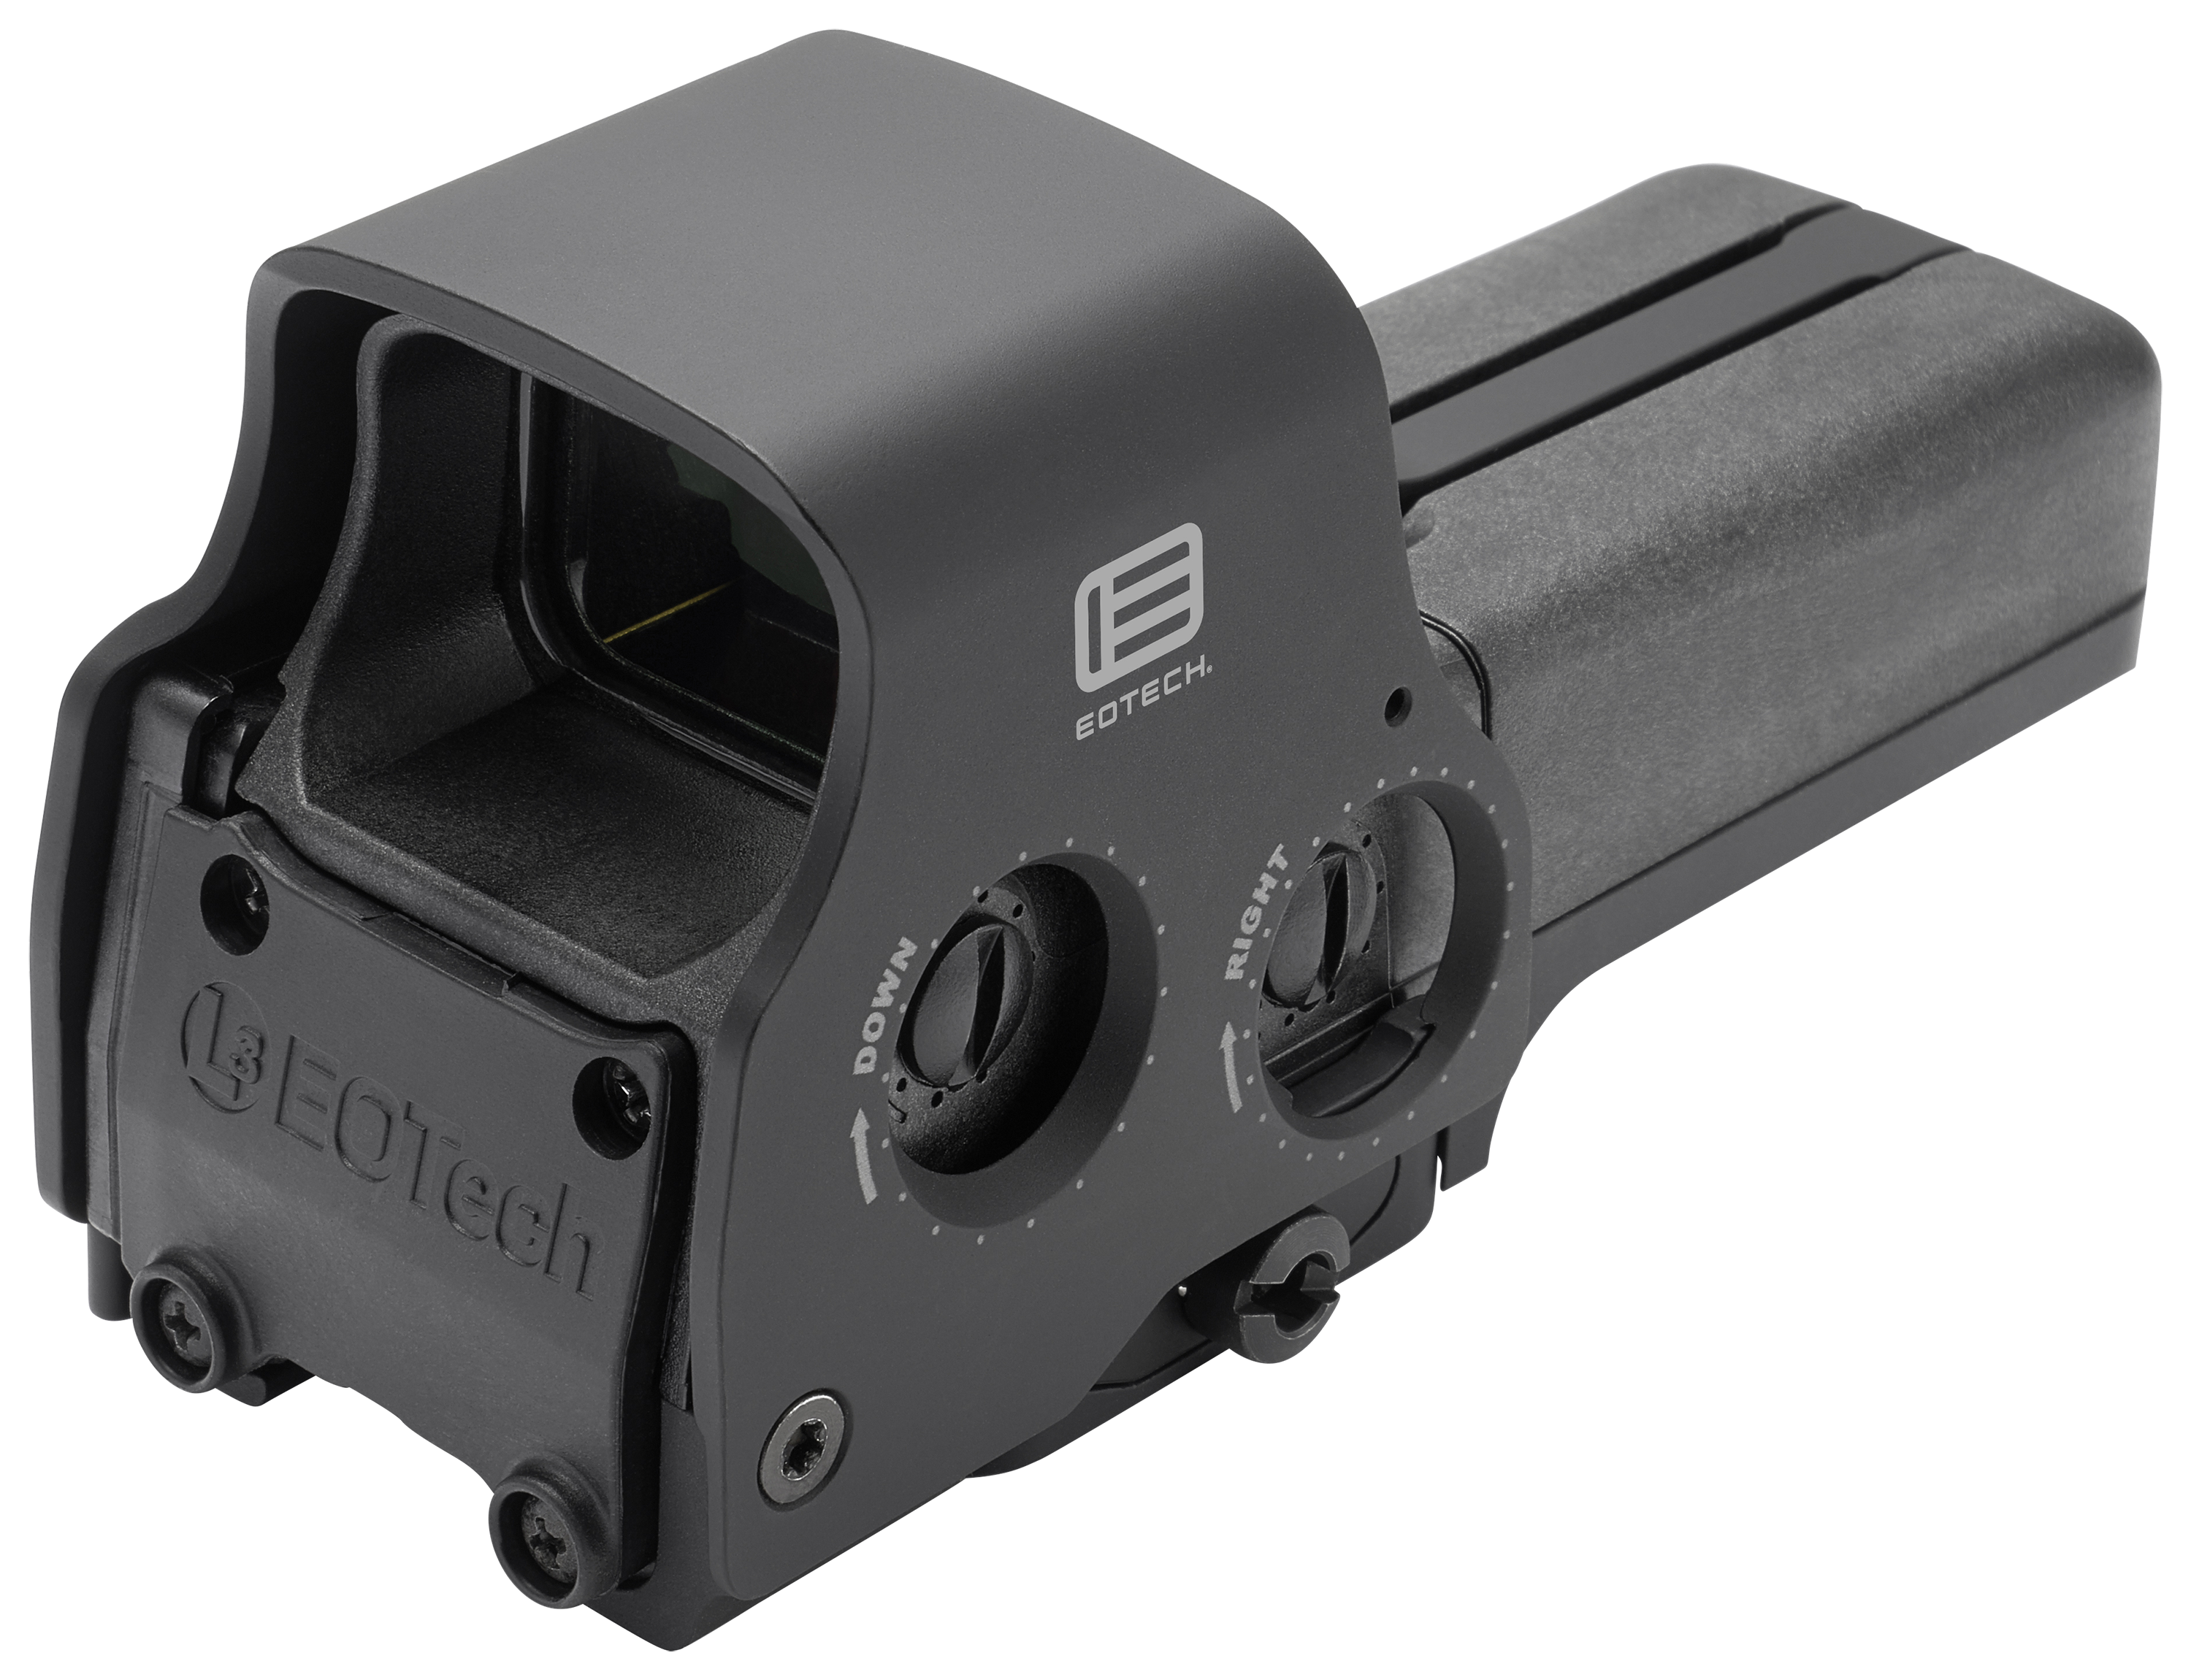 EOTECH Model 518 Holographic Weapon Sight